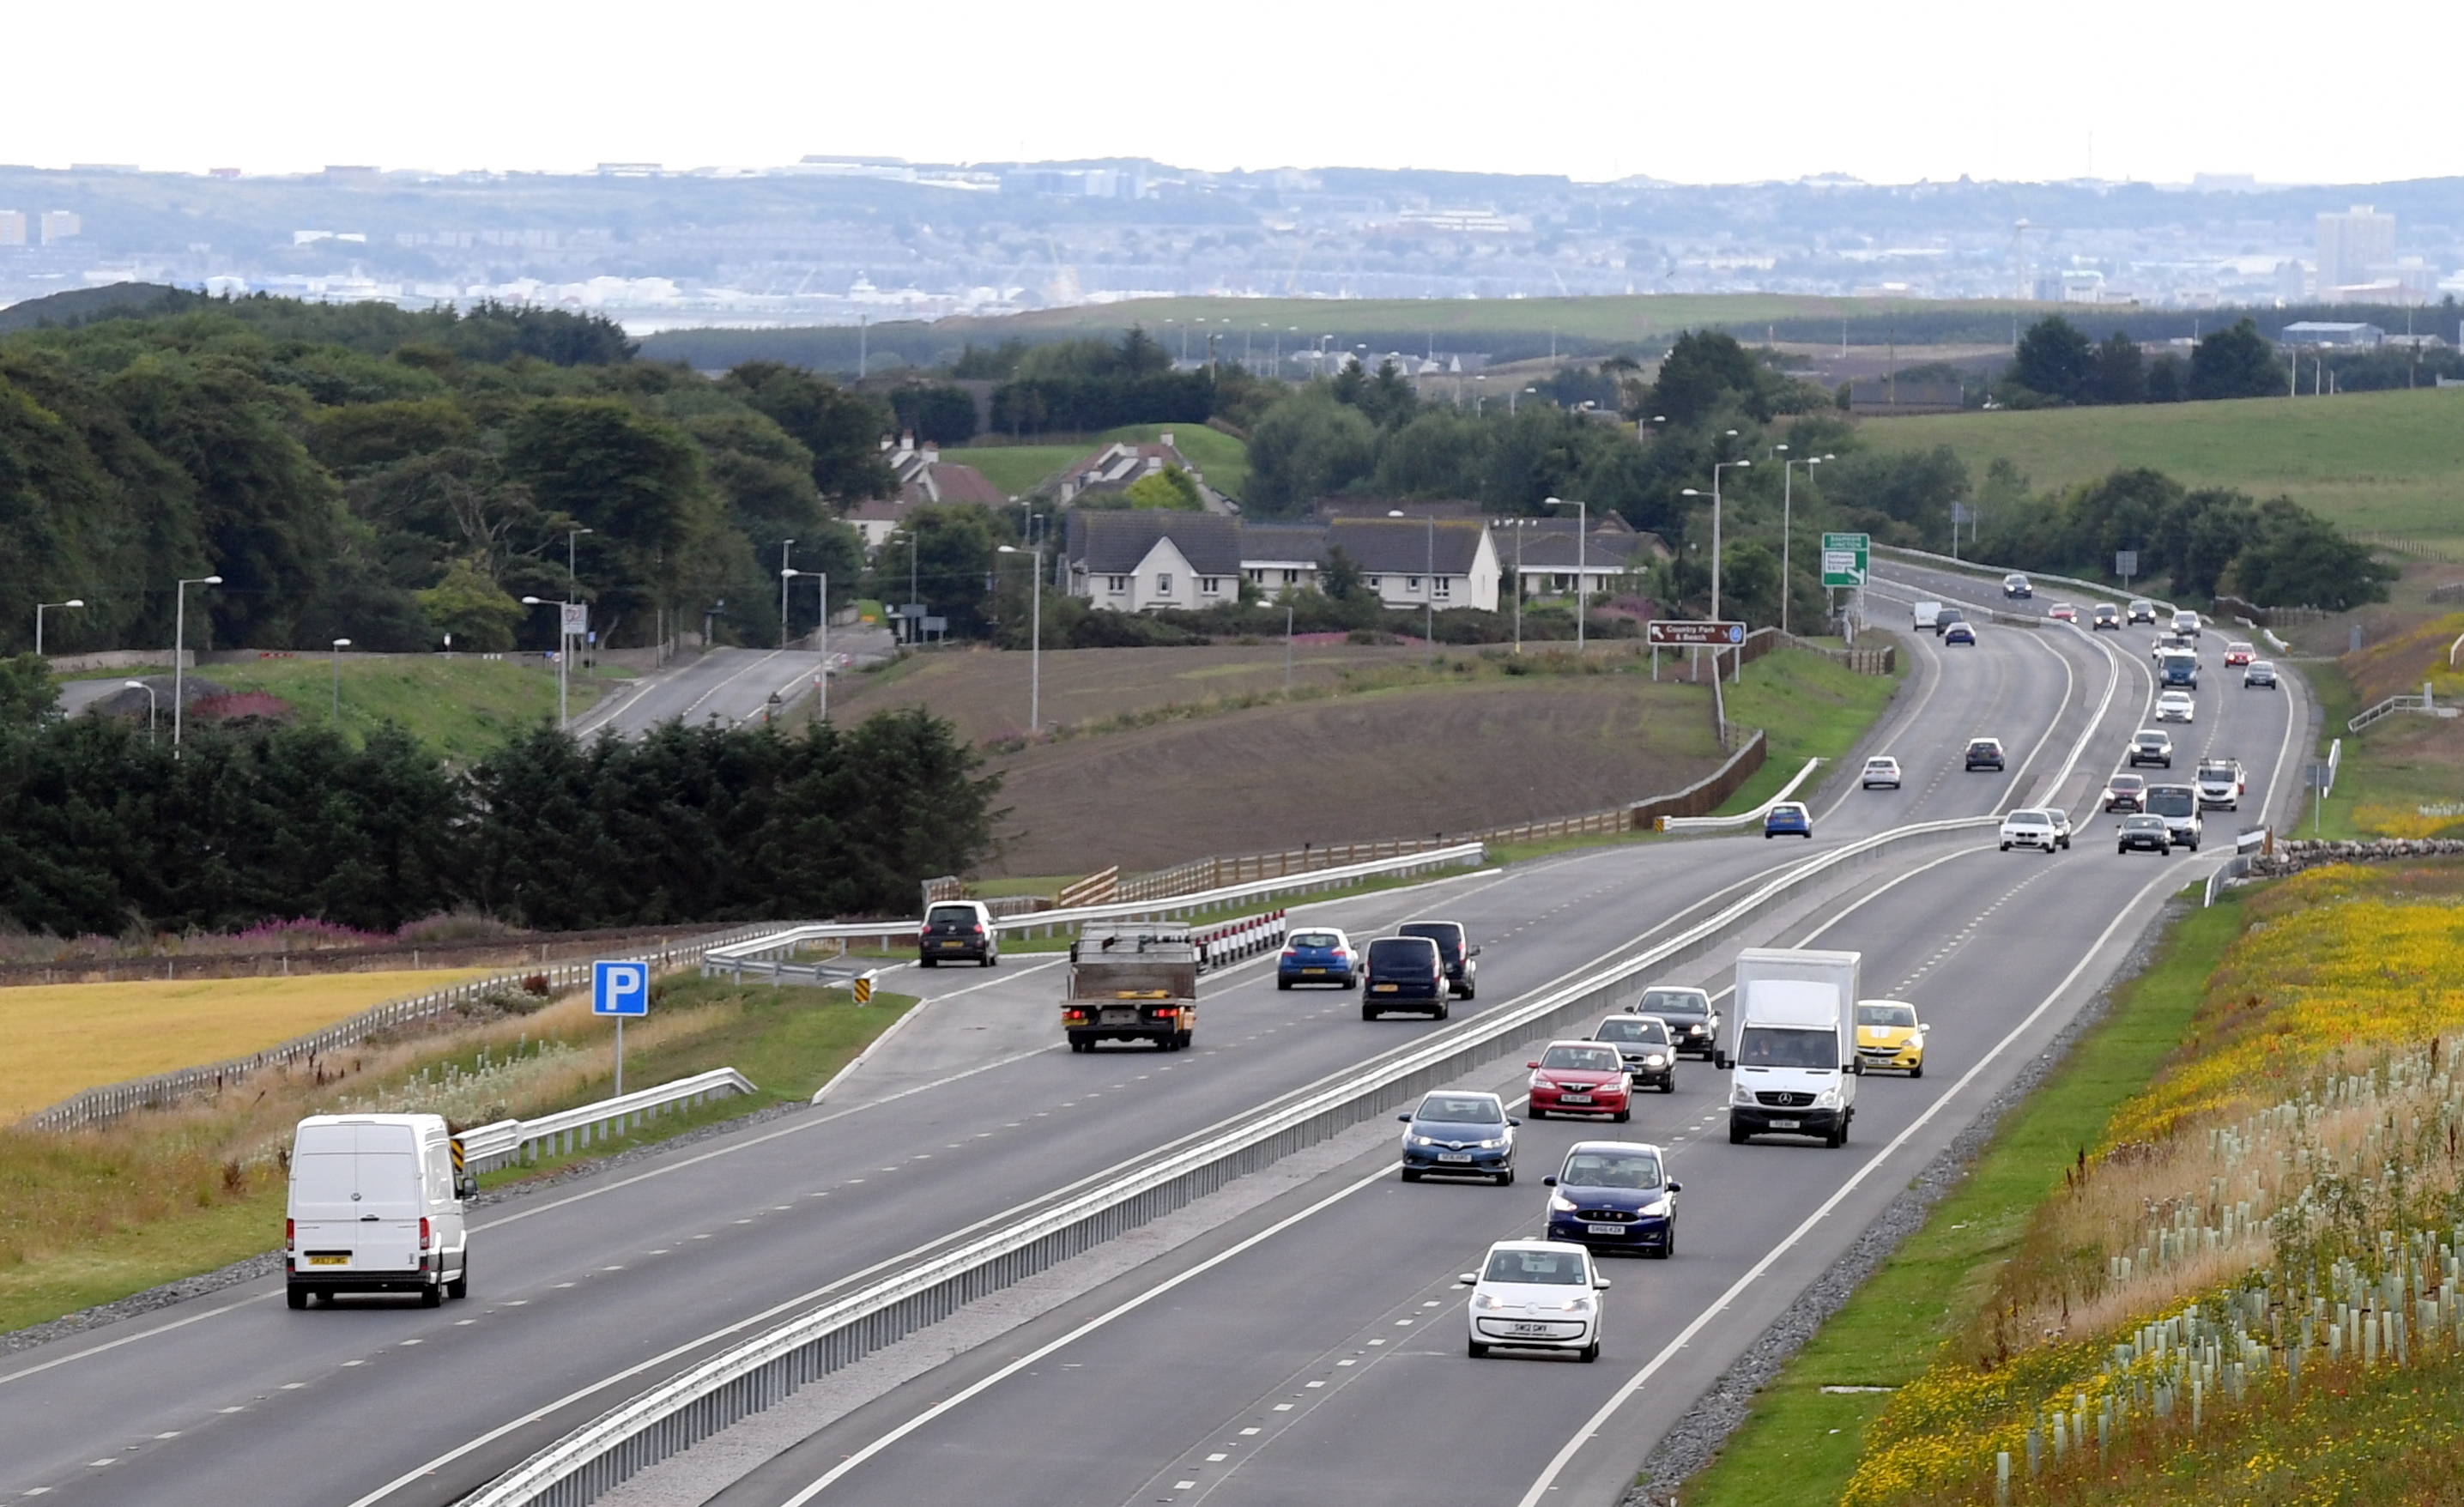 The A90 between Aberdeen and Dundee